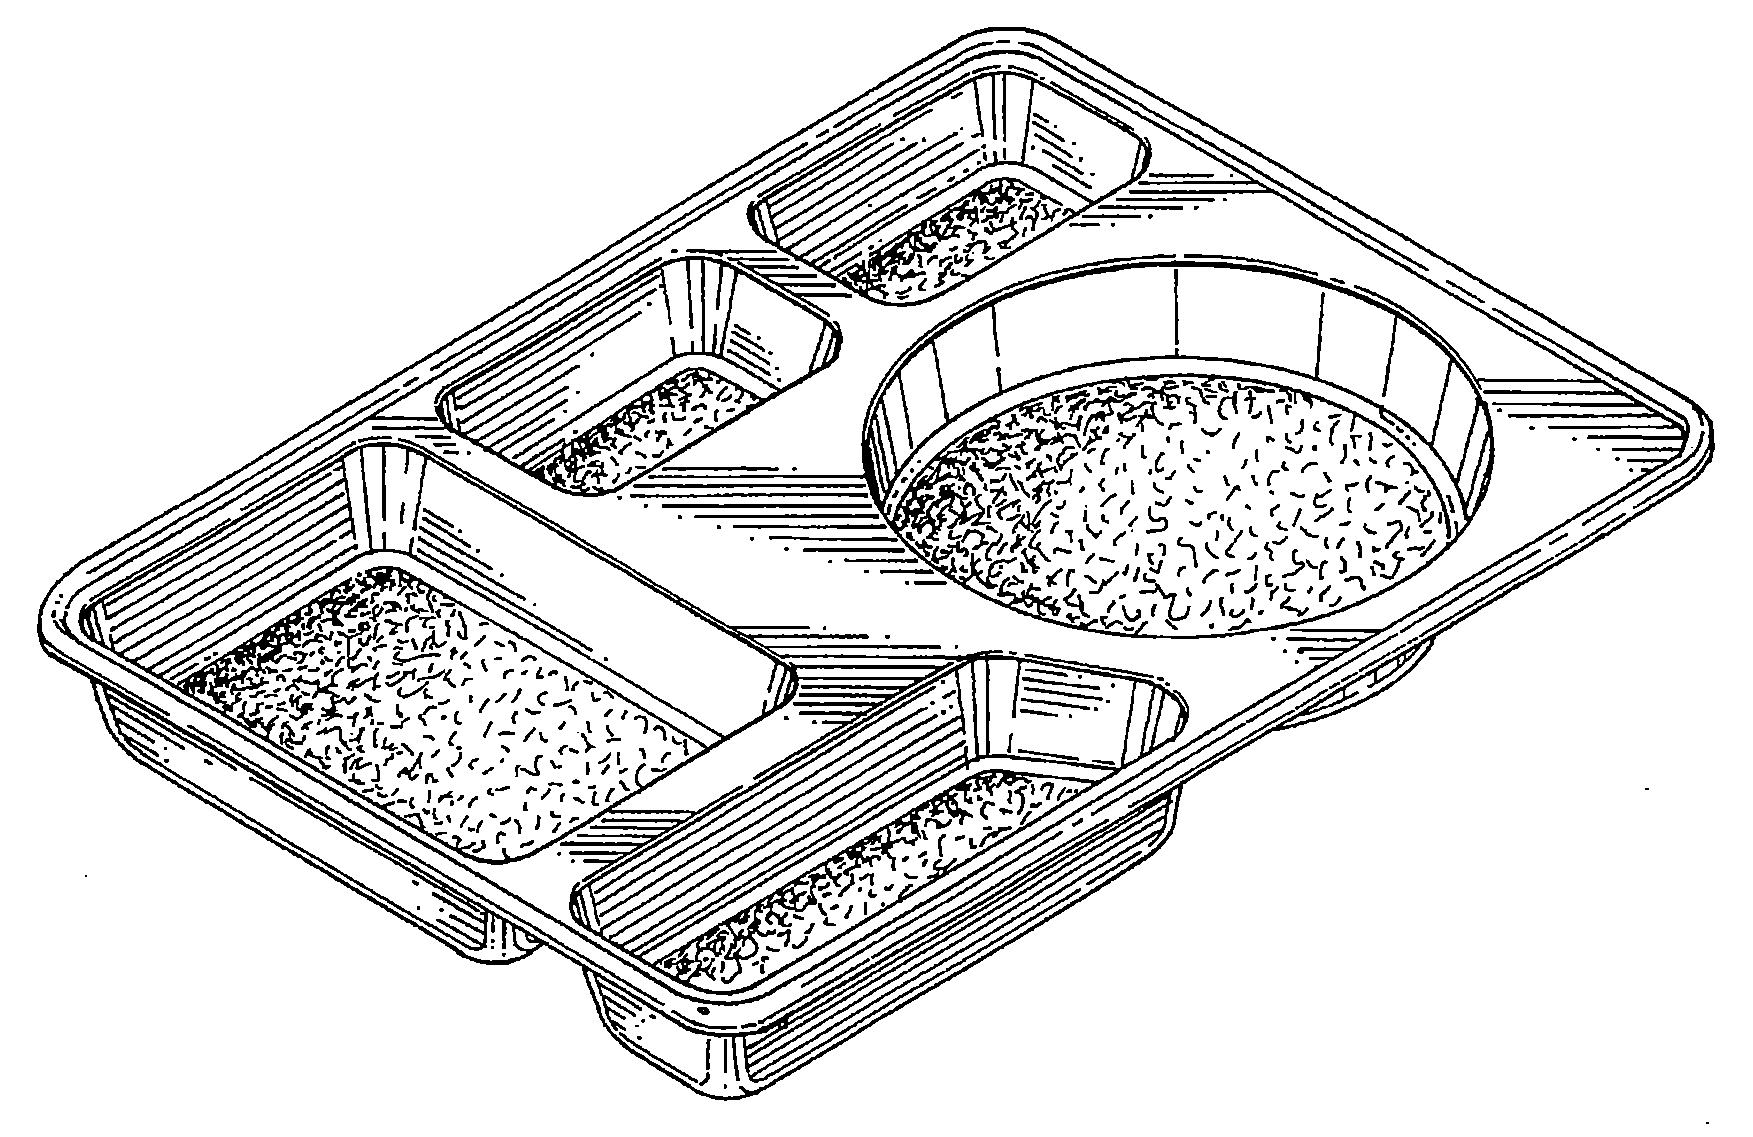 Example of a design for a compartmented tray with a rectangularperimeter that shows a circular compartment.
